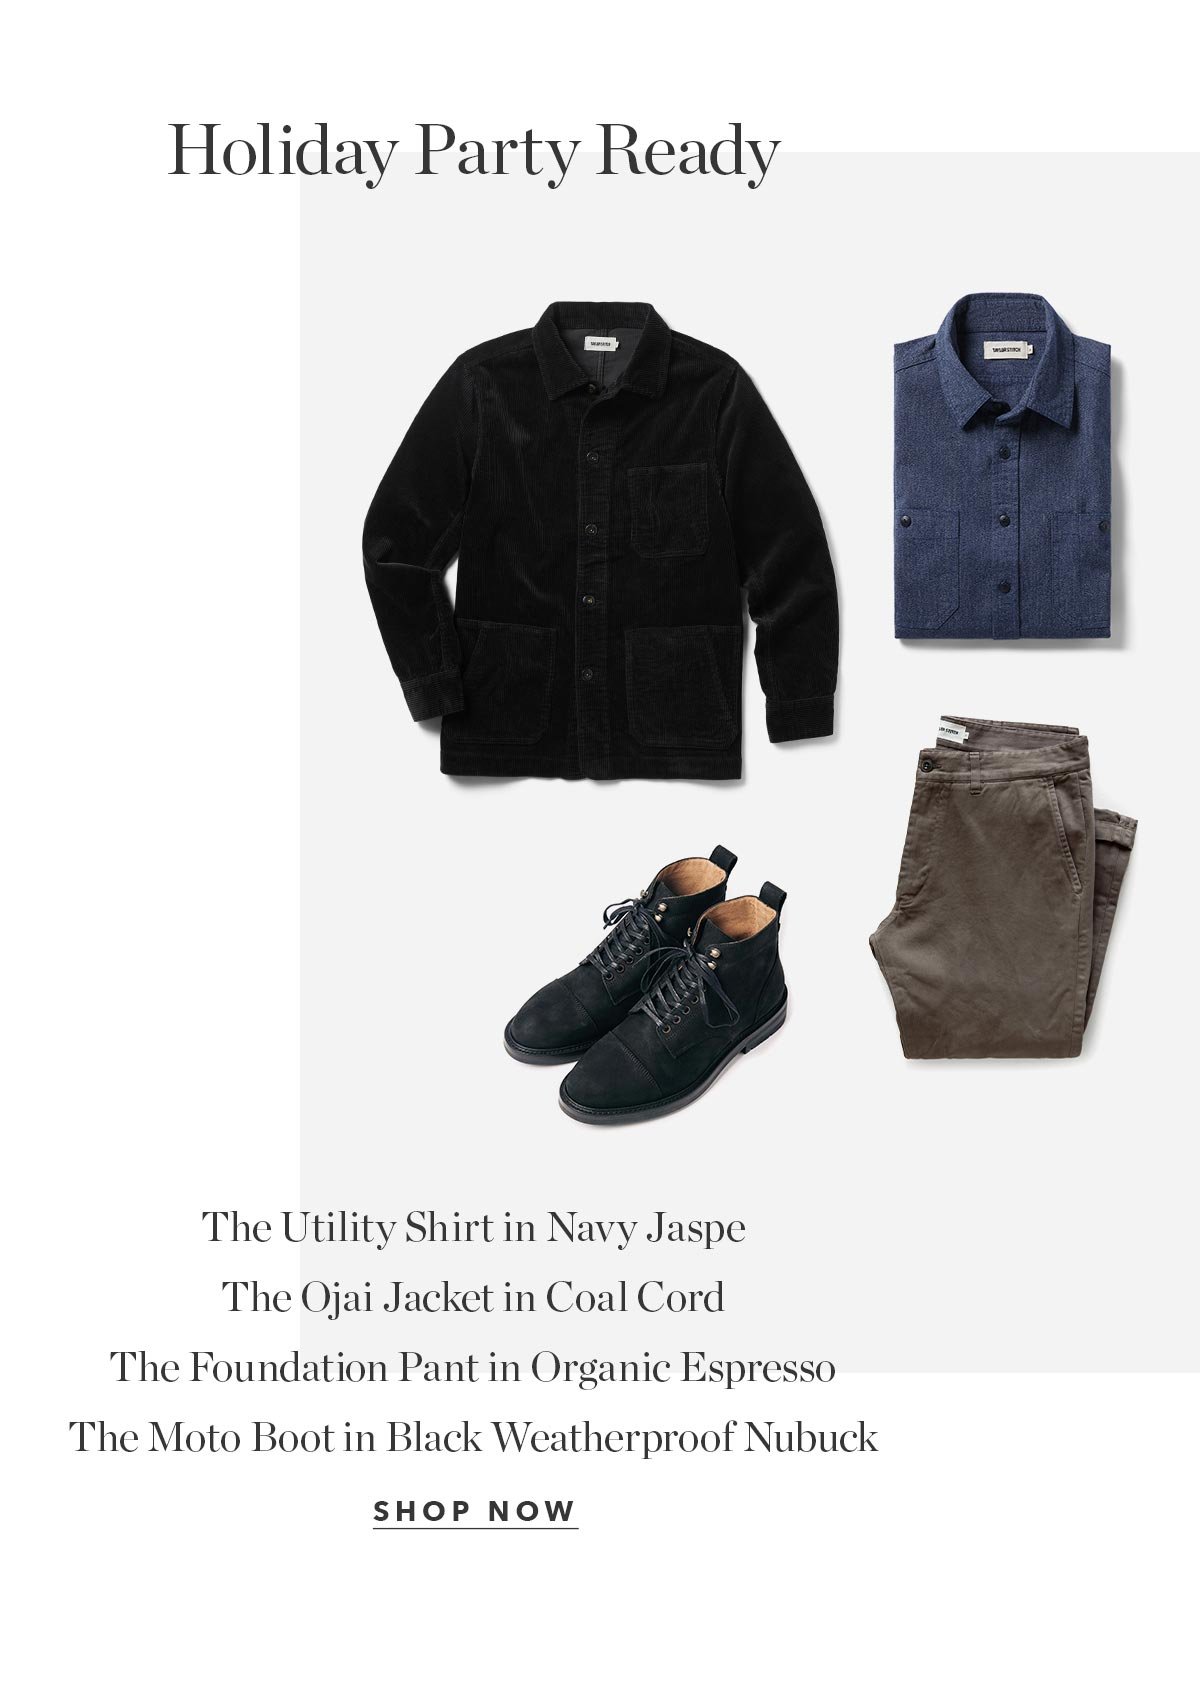 Holiday Party Ready: The Utility Shirt in Navy Jaspe, The Ojai Jacket in Coal Cord, The Foundation Pant in Organic Espresso, The Rambler Chukka in Mushroom Suede